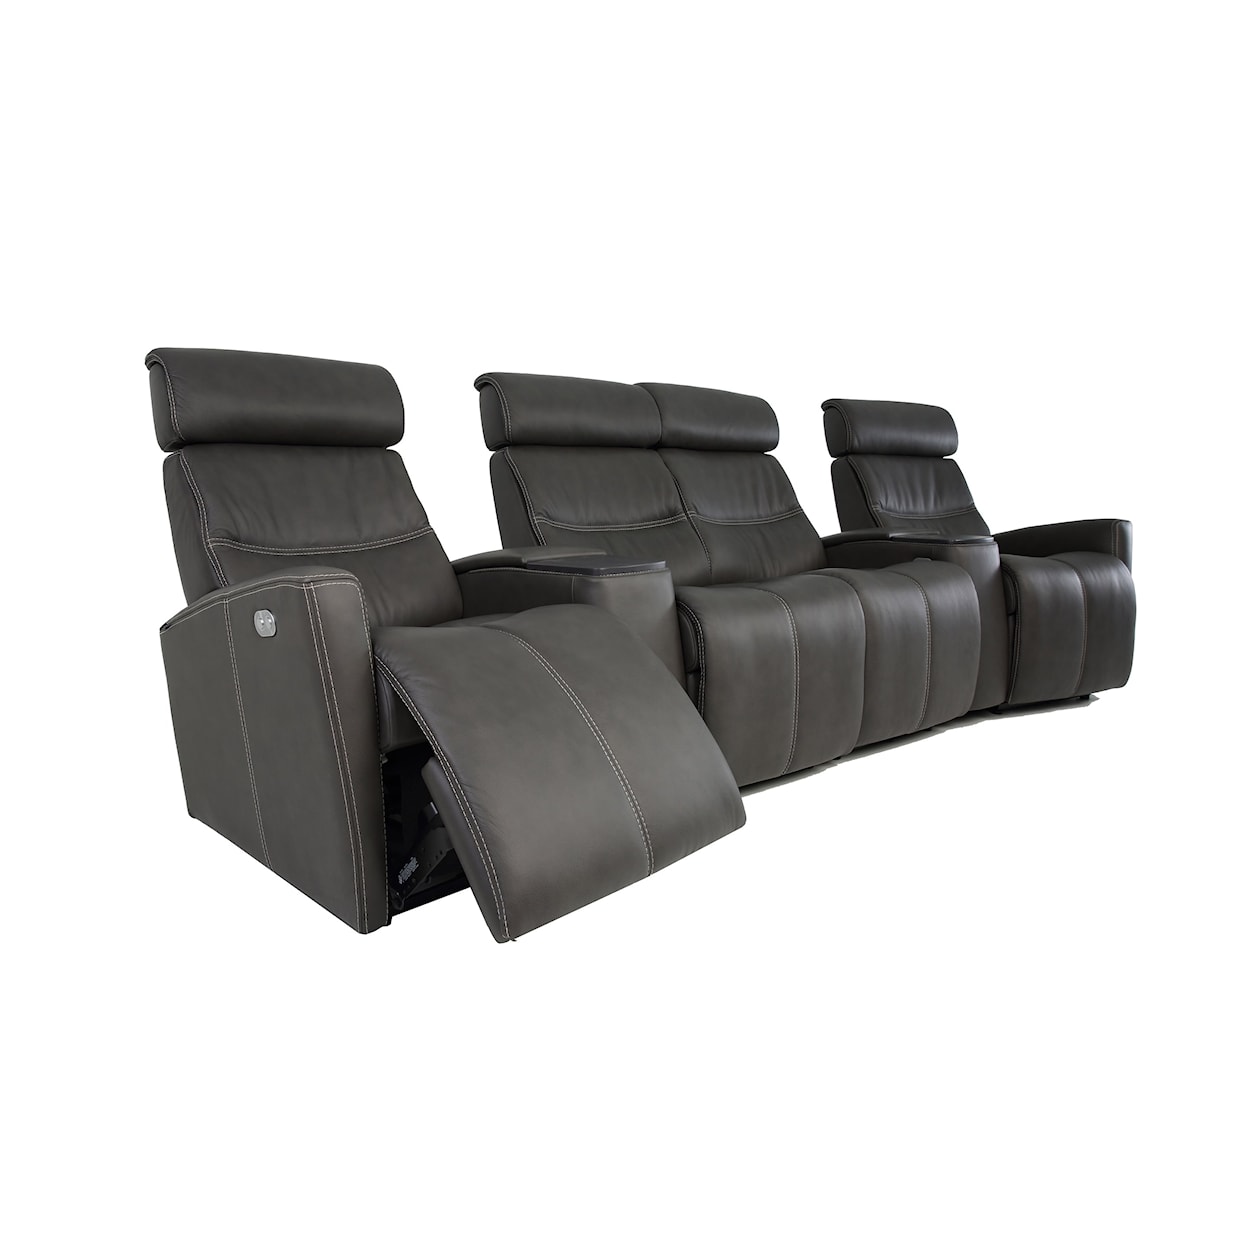 Fjords by Hjellegjerde Relax Collection Milan 4-seat Home Cinema Sofa